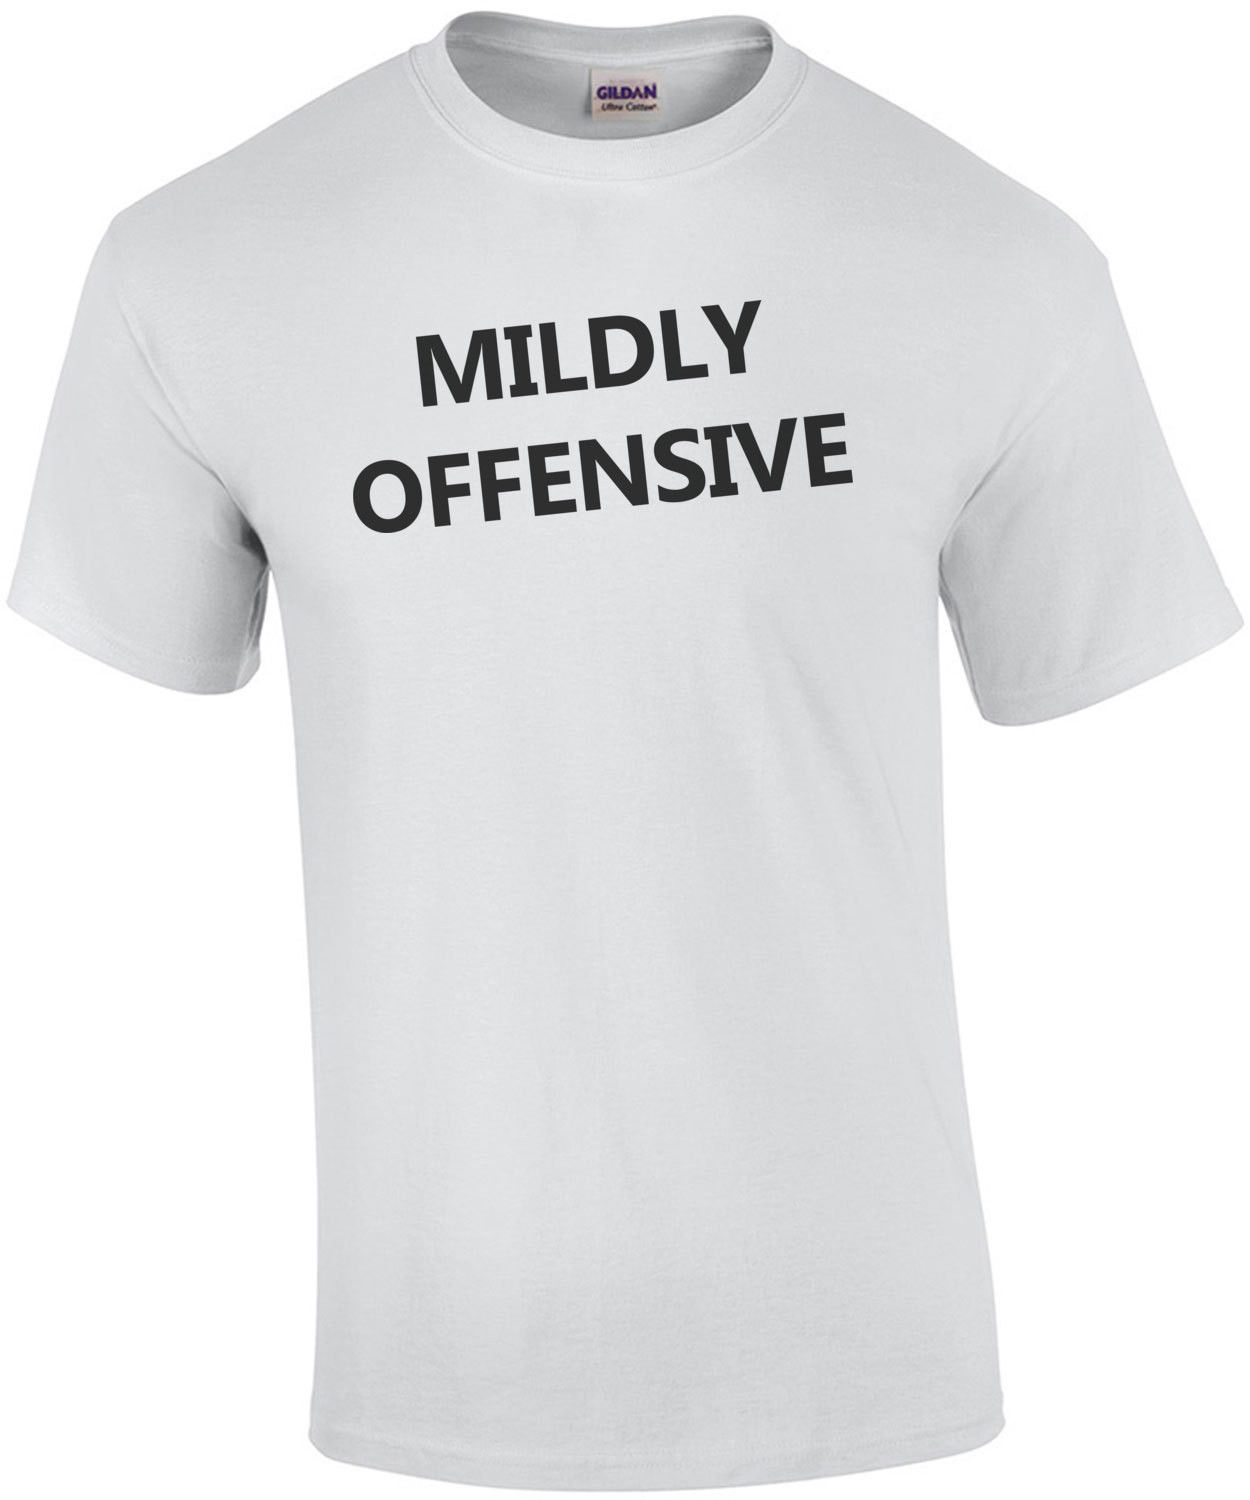 Mildly Offensive - Funny T-Shirt